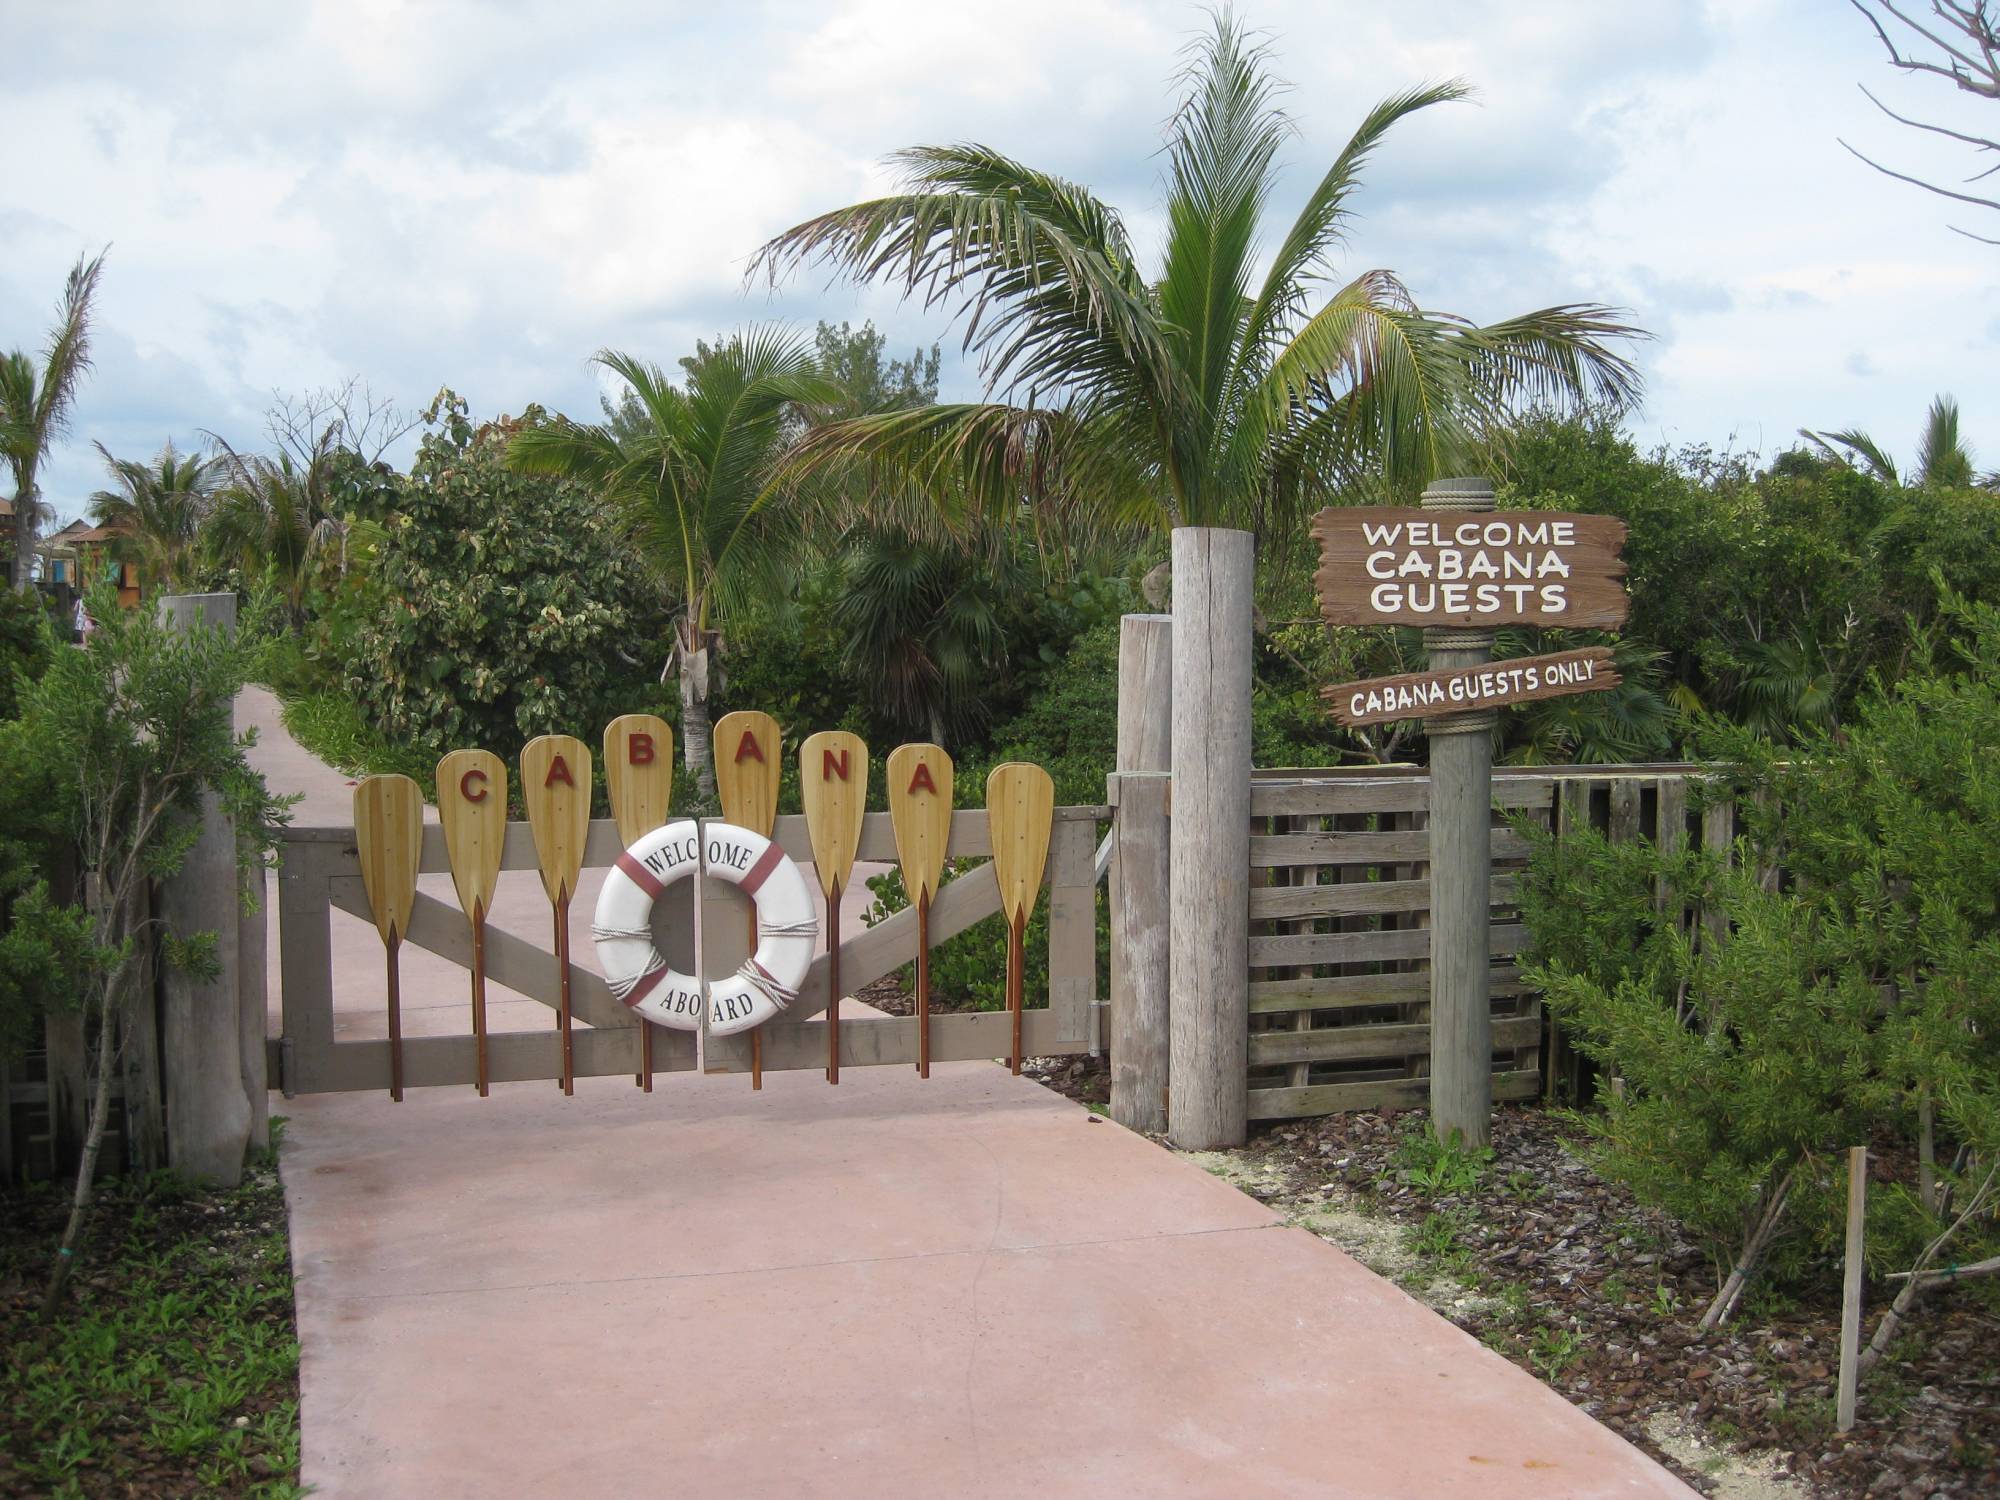 Make the most of Castaway Cay by renting a private cabana |PassPorter.com